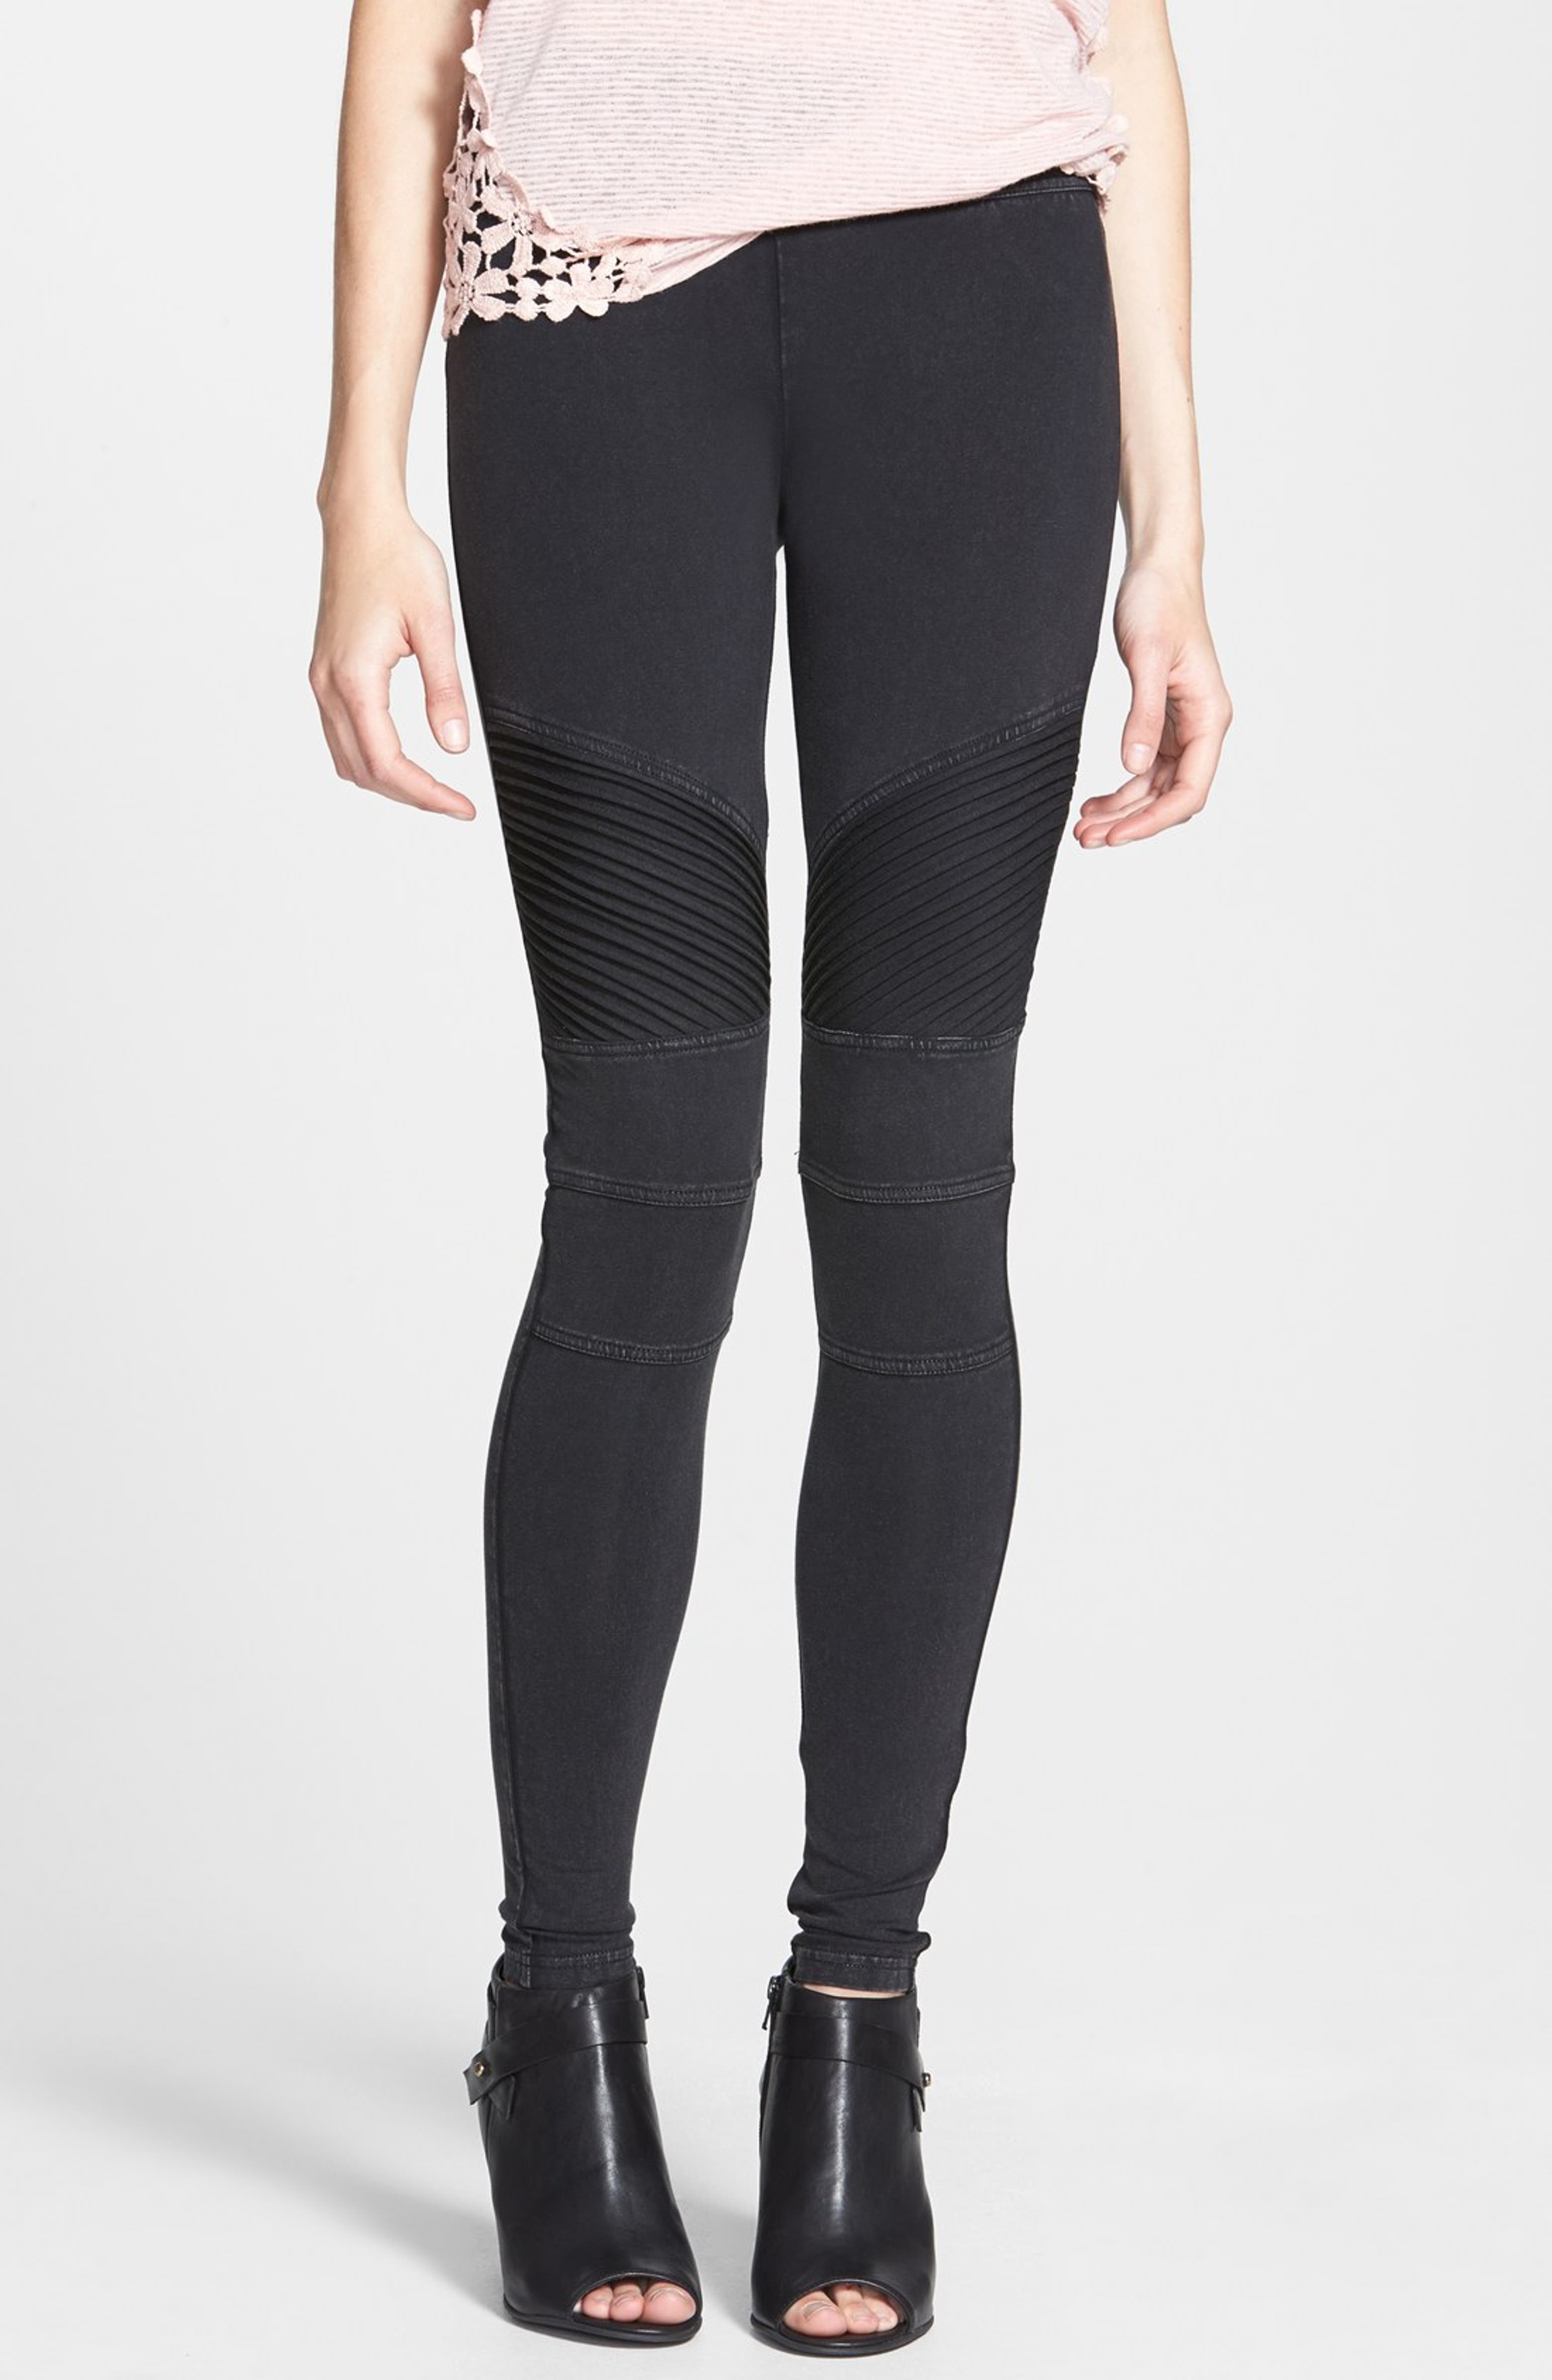 Sell Leggings Direct Sales  International Society of Precision